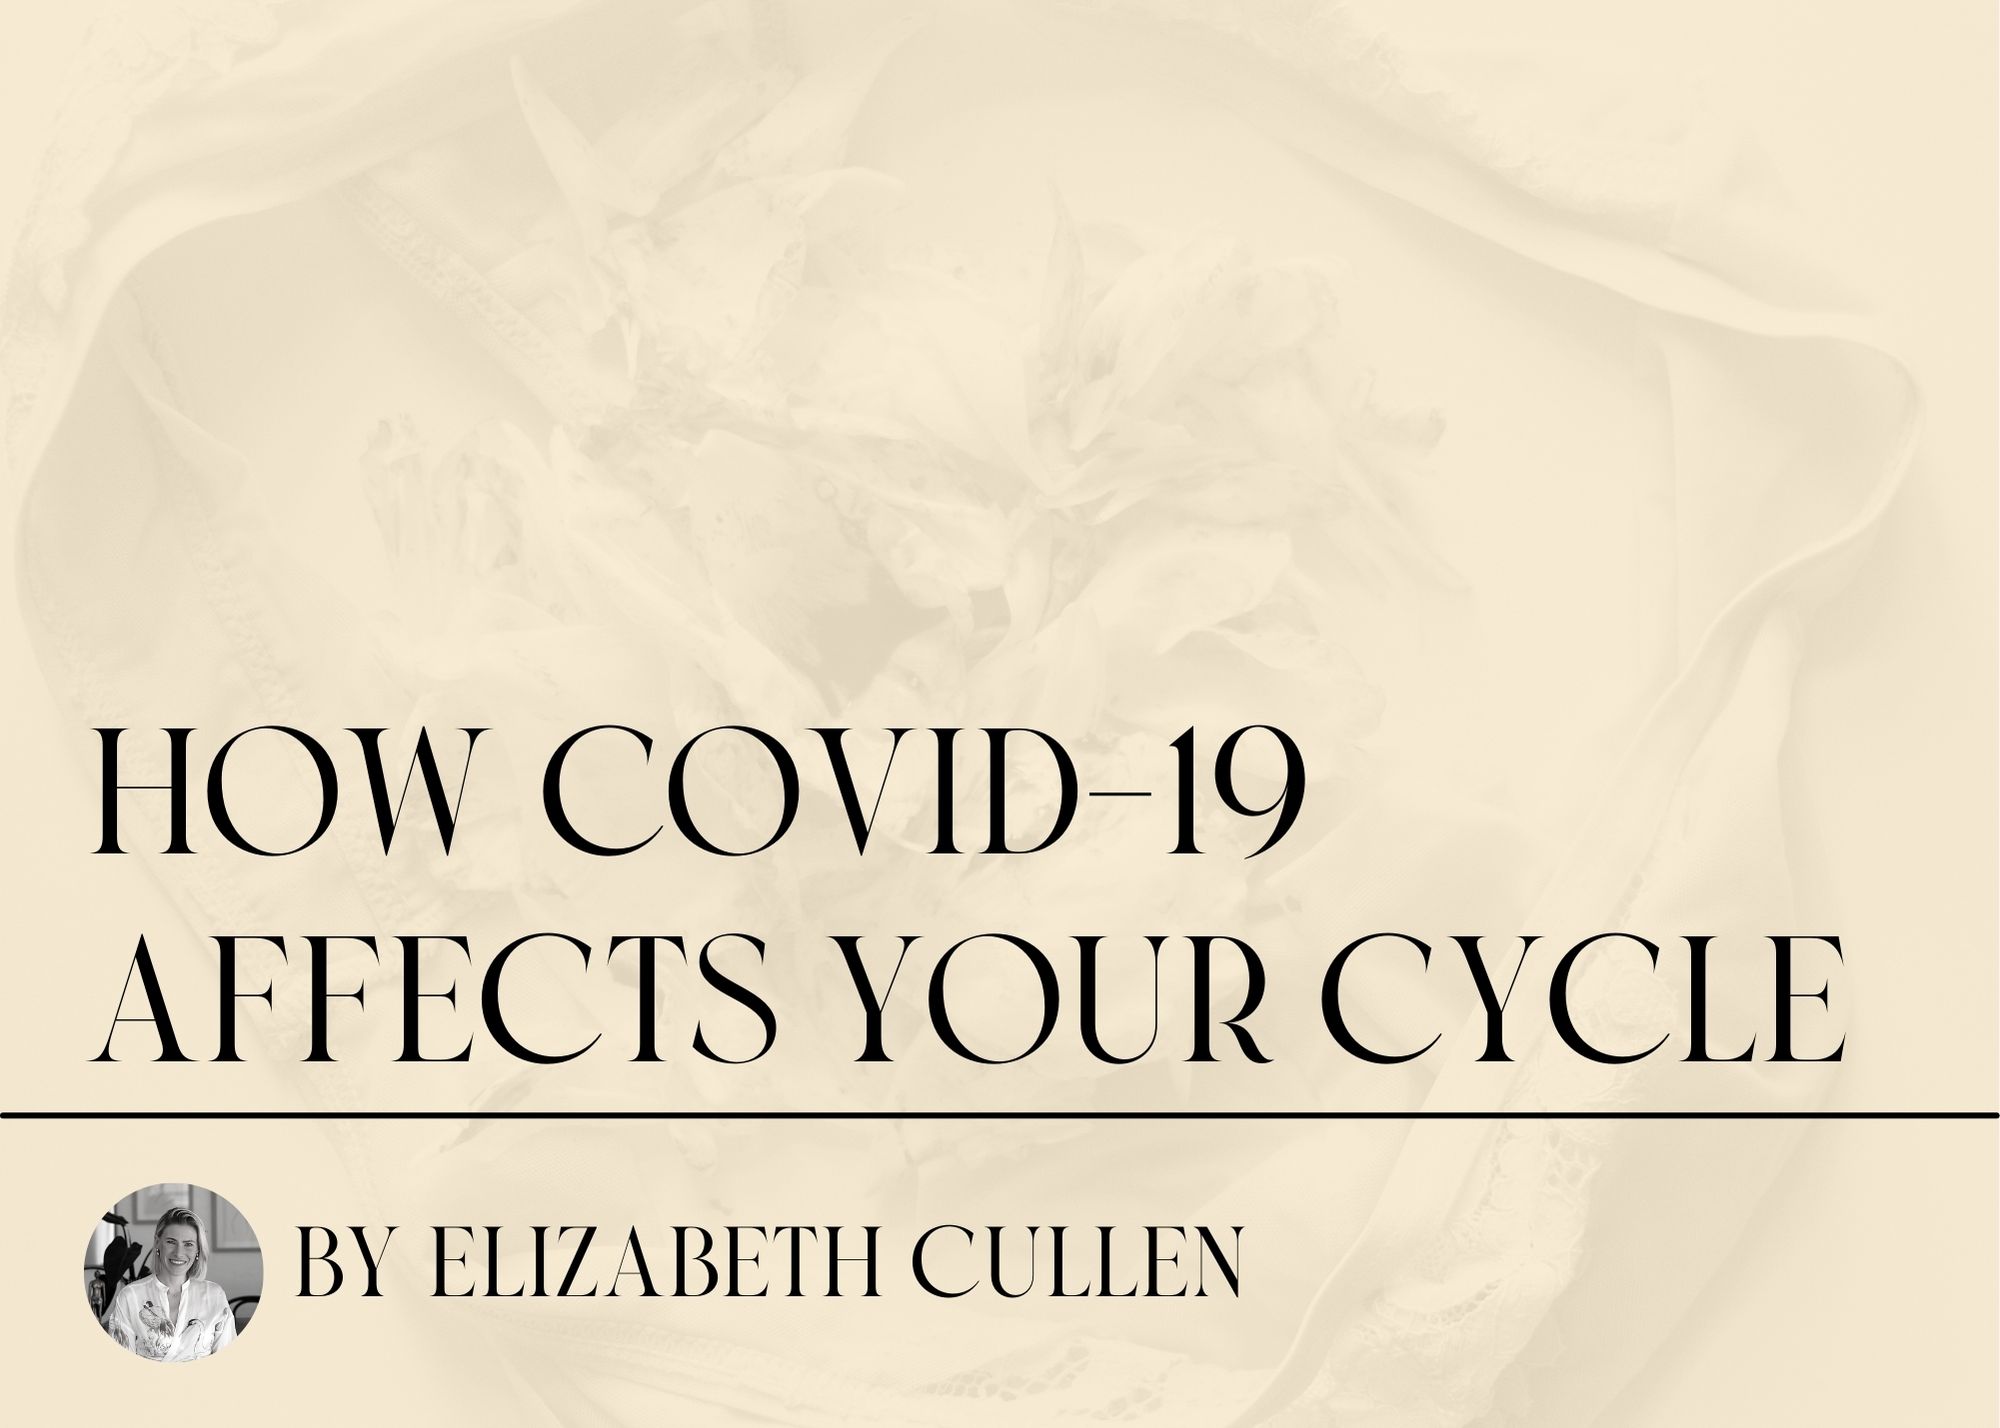 How COVID-19 affects your cycle